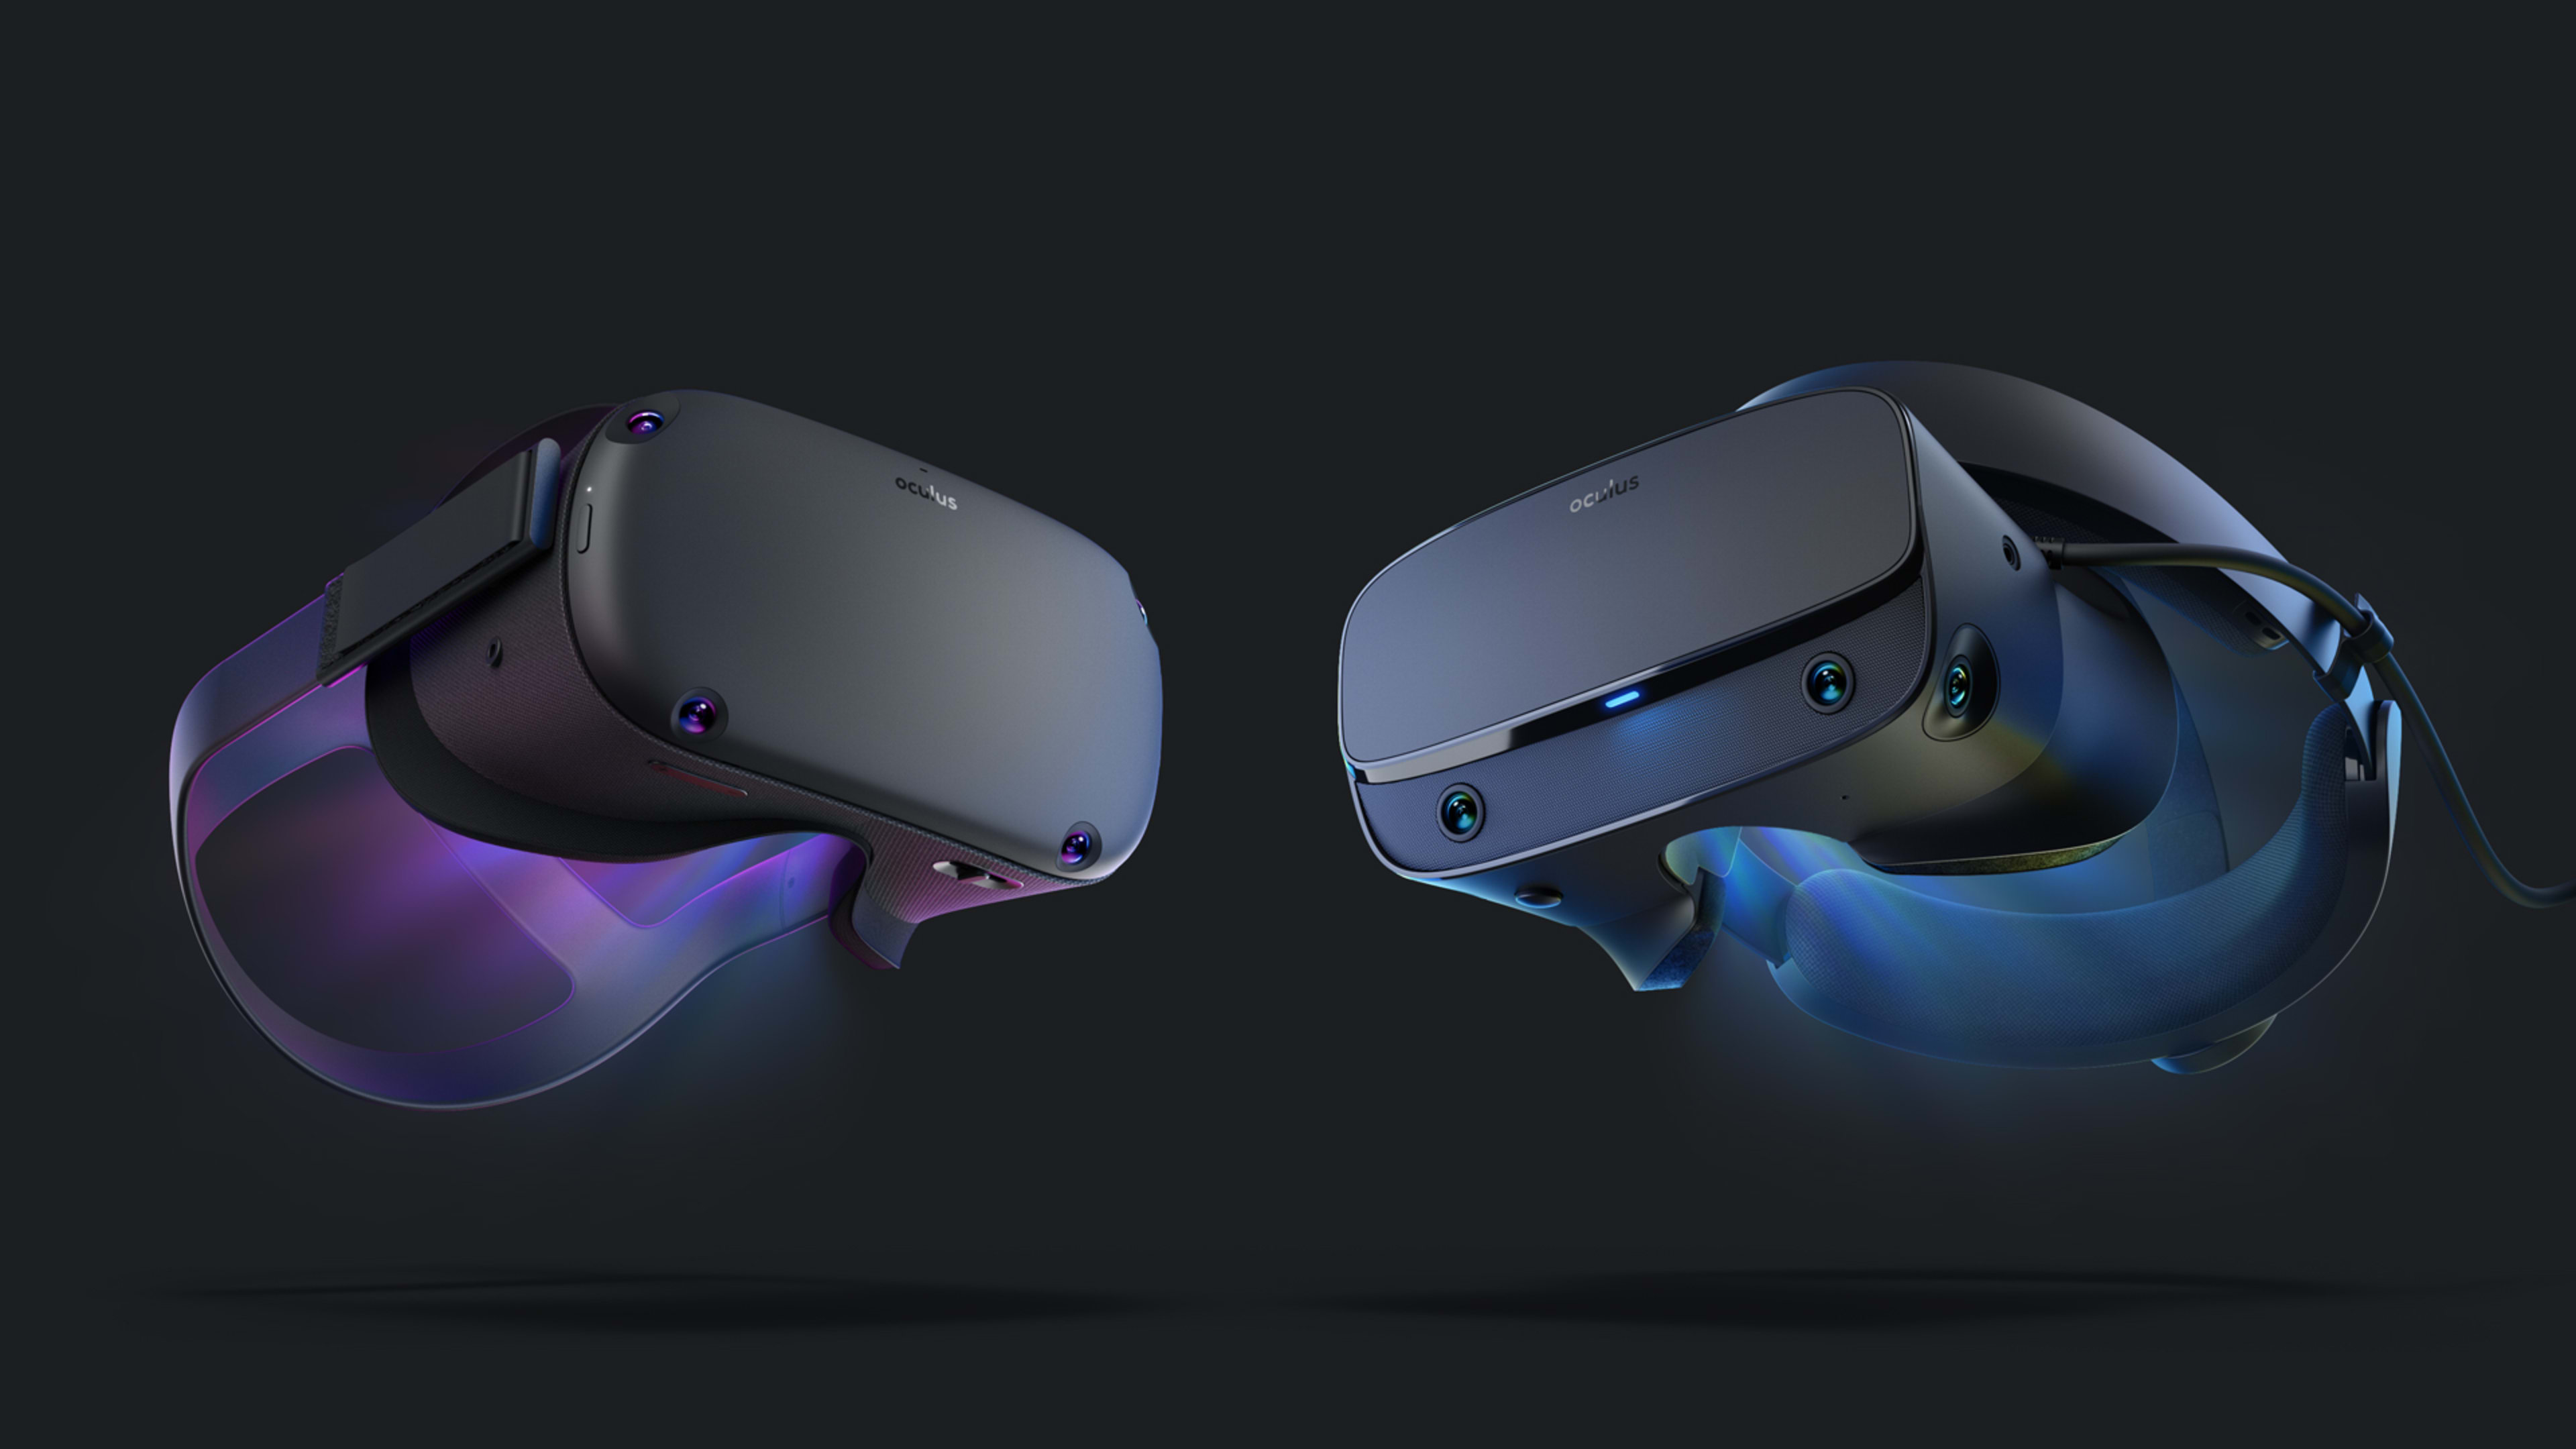 Facebook’s Oculus Quest and Rift S will ship May 21 for $399